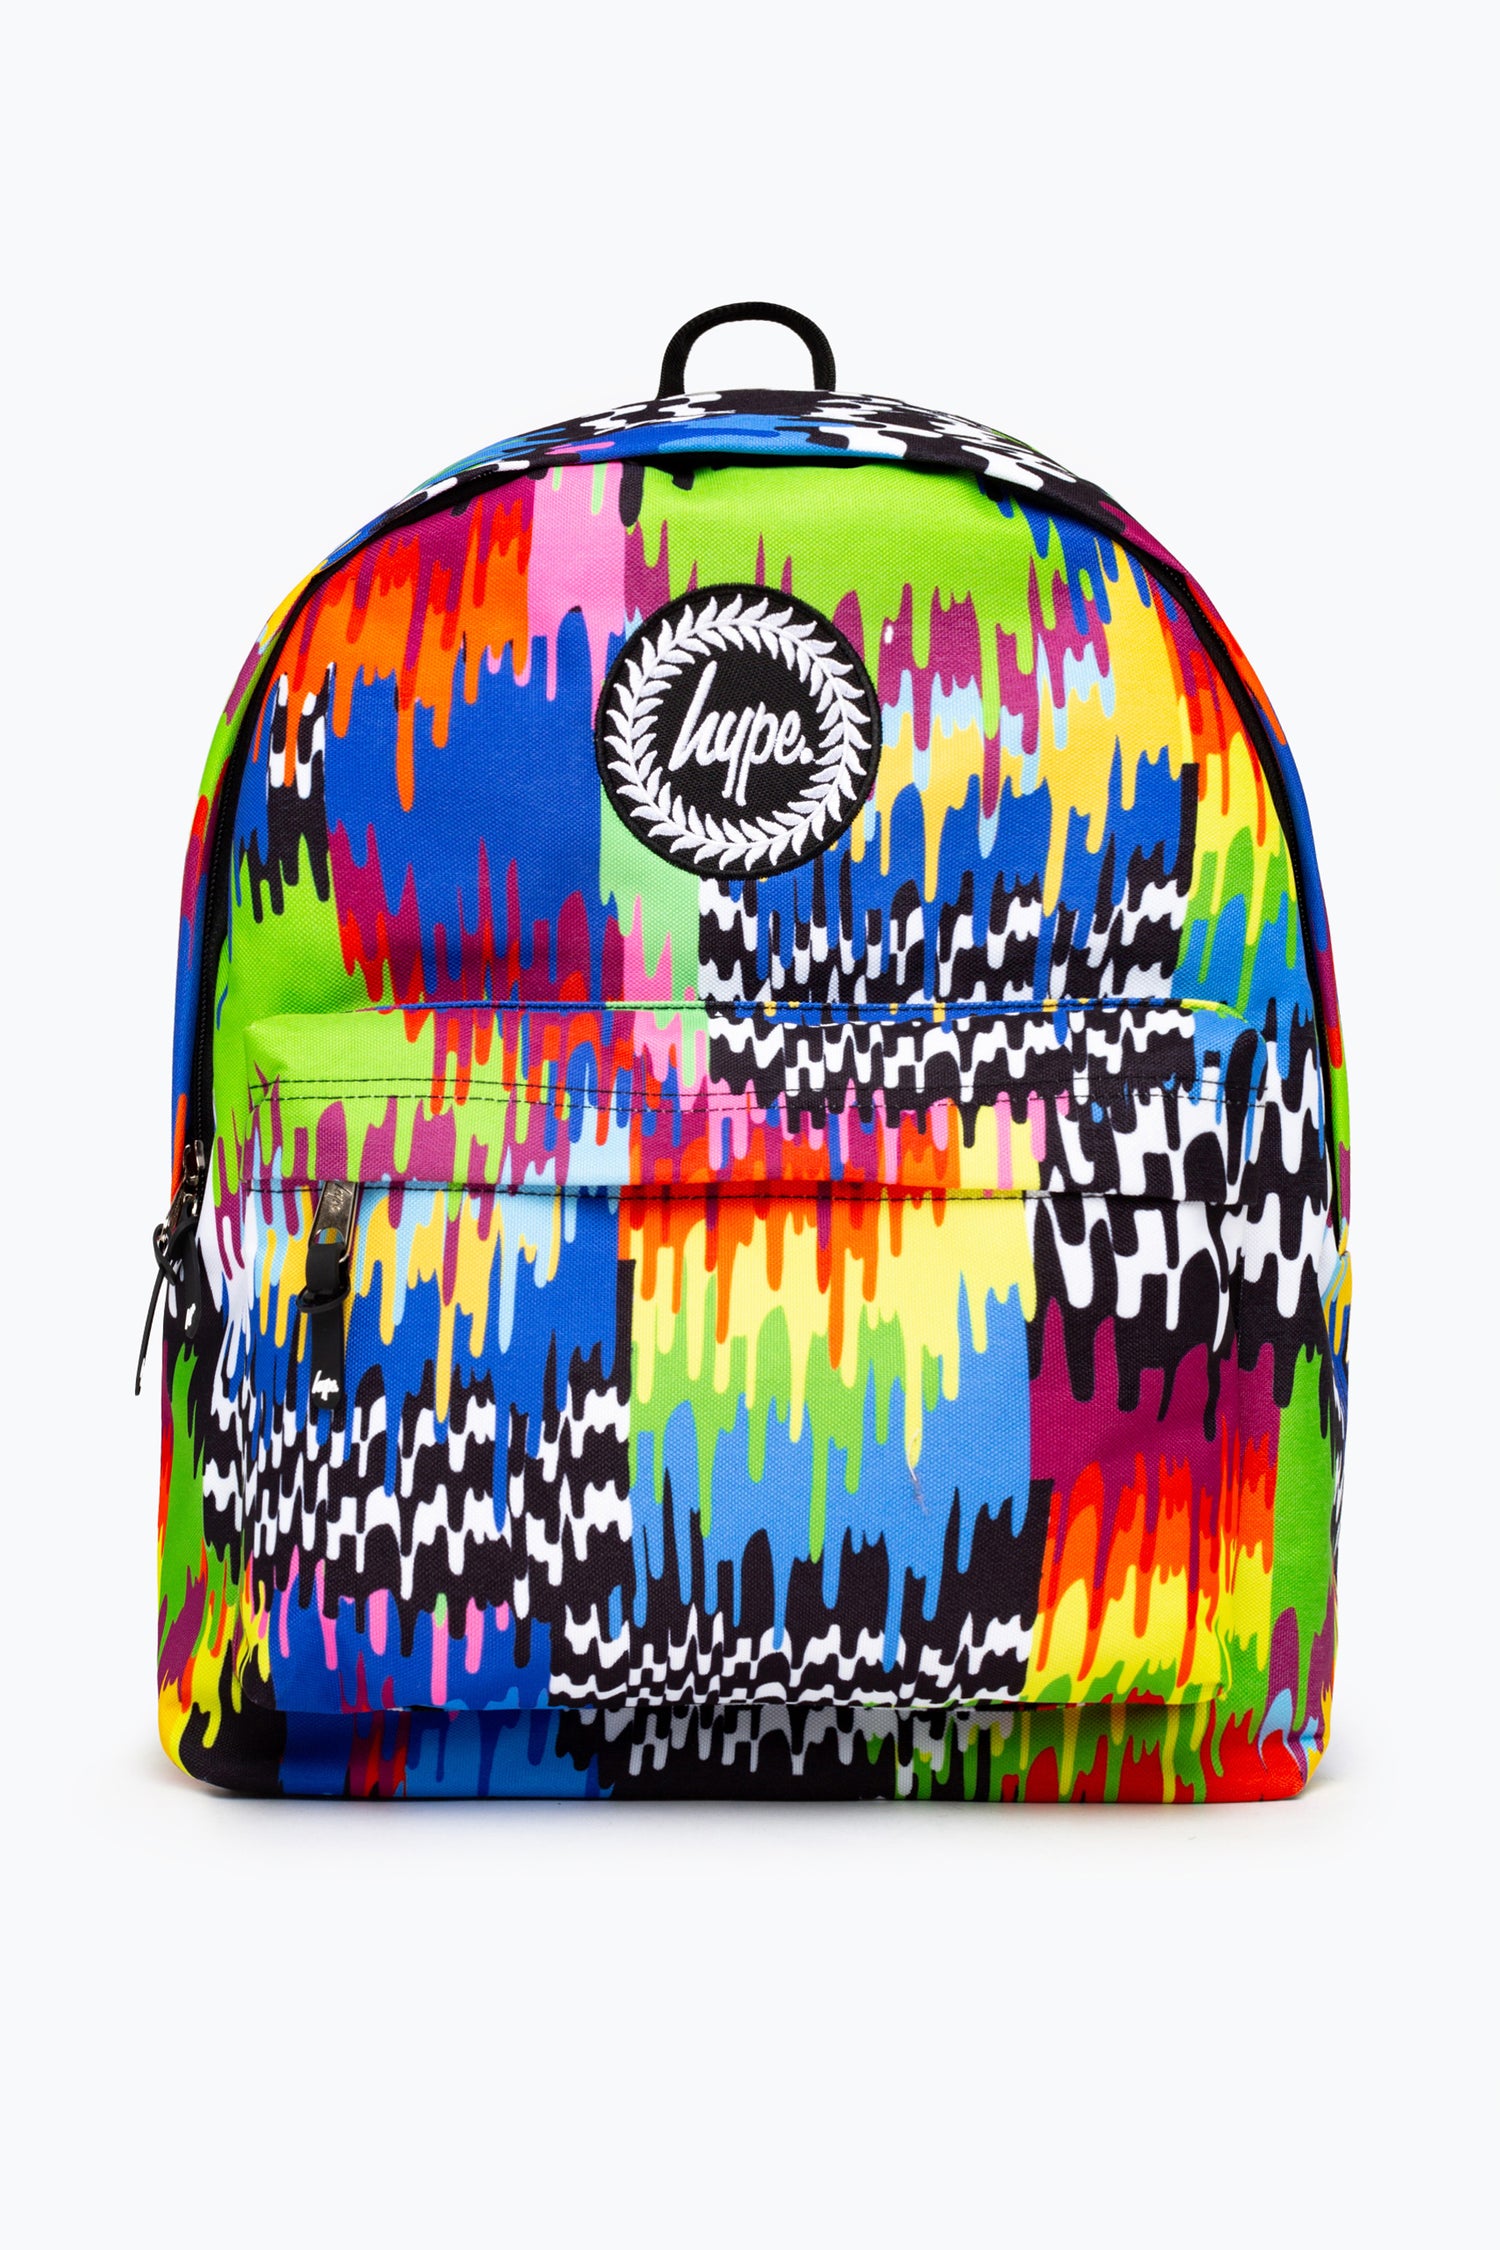 Trippy Psychedelic Backpack Casual Hiking Camping Travel Backpacks  Lightweight Daypack Bag Women Men Bookbag - AliExpress